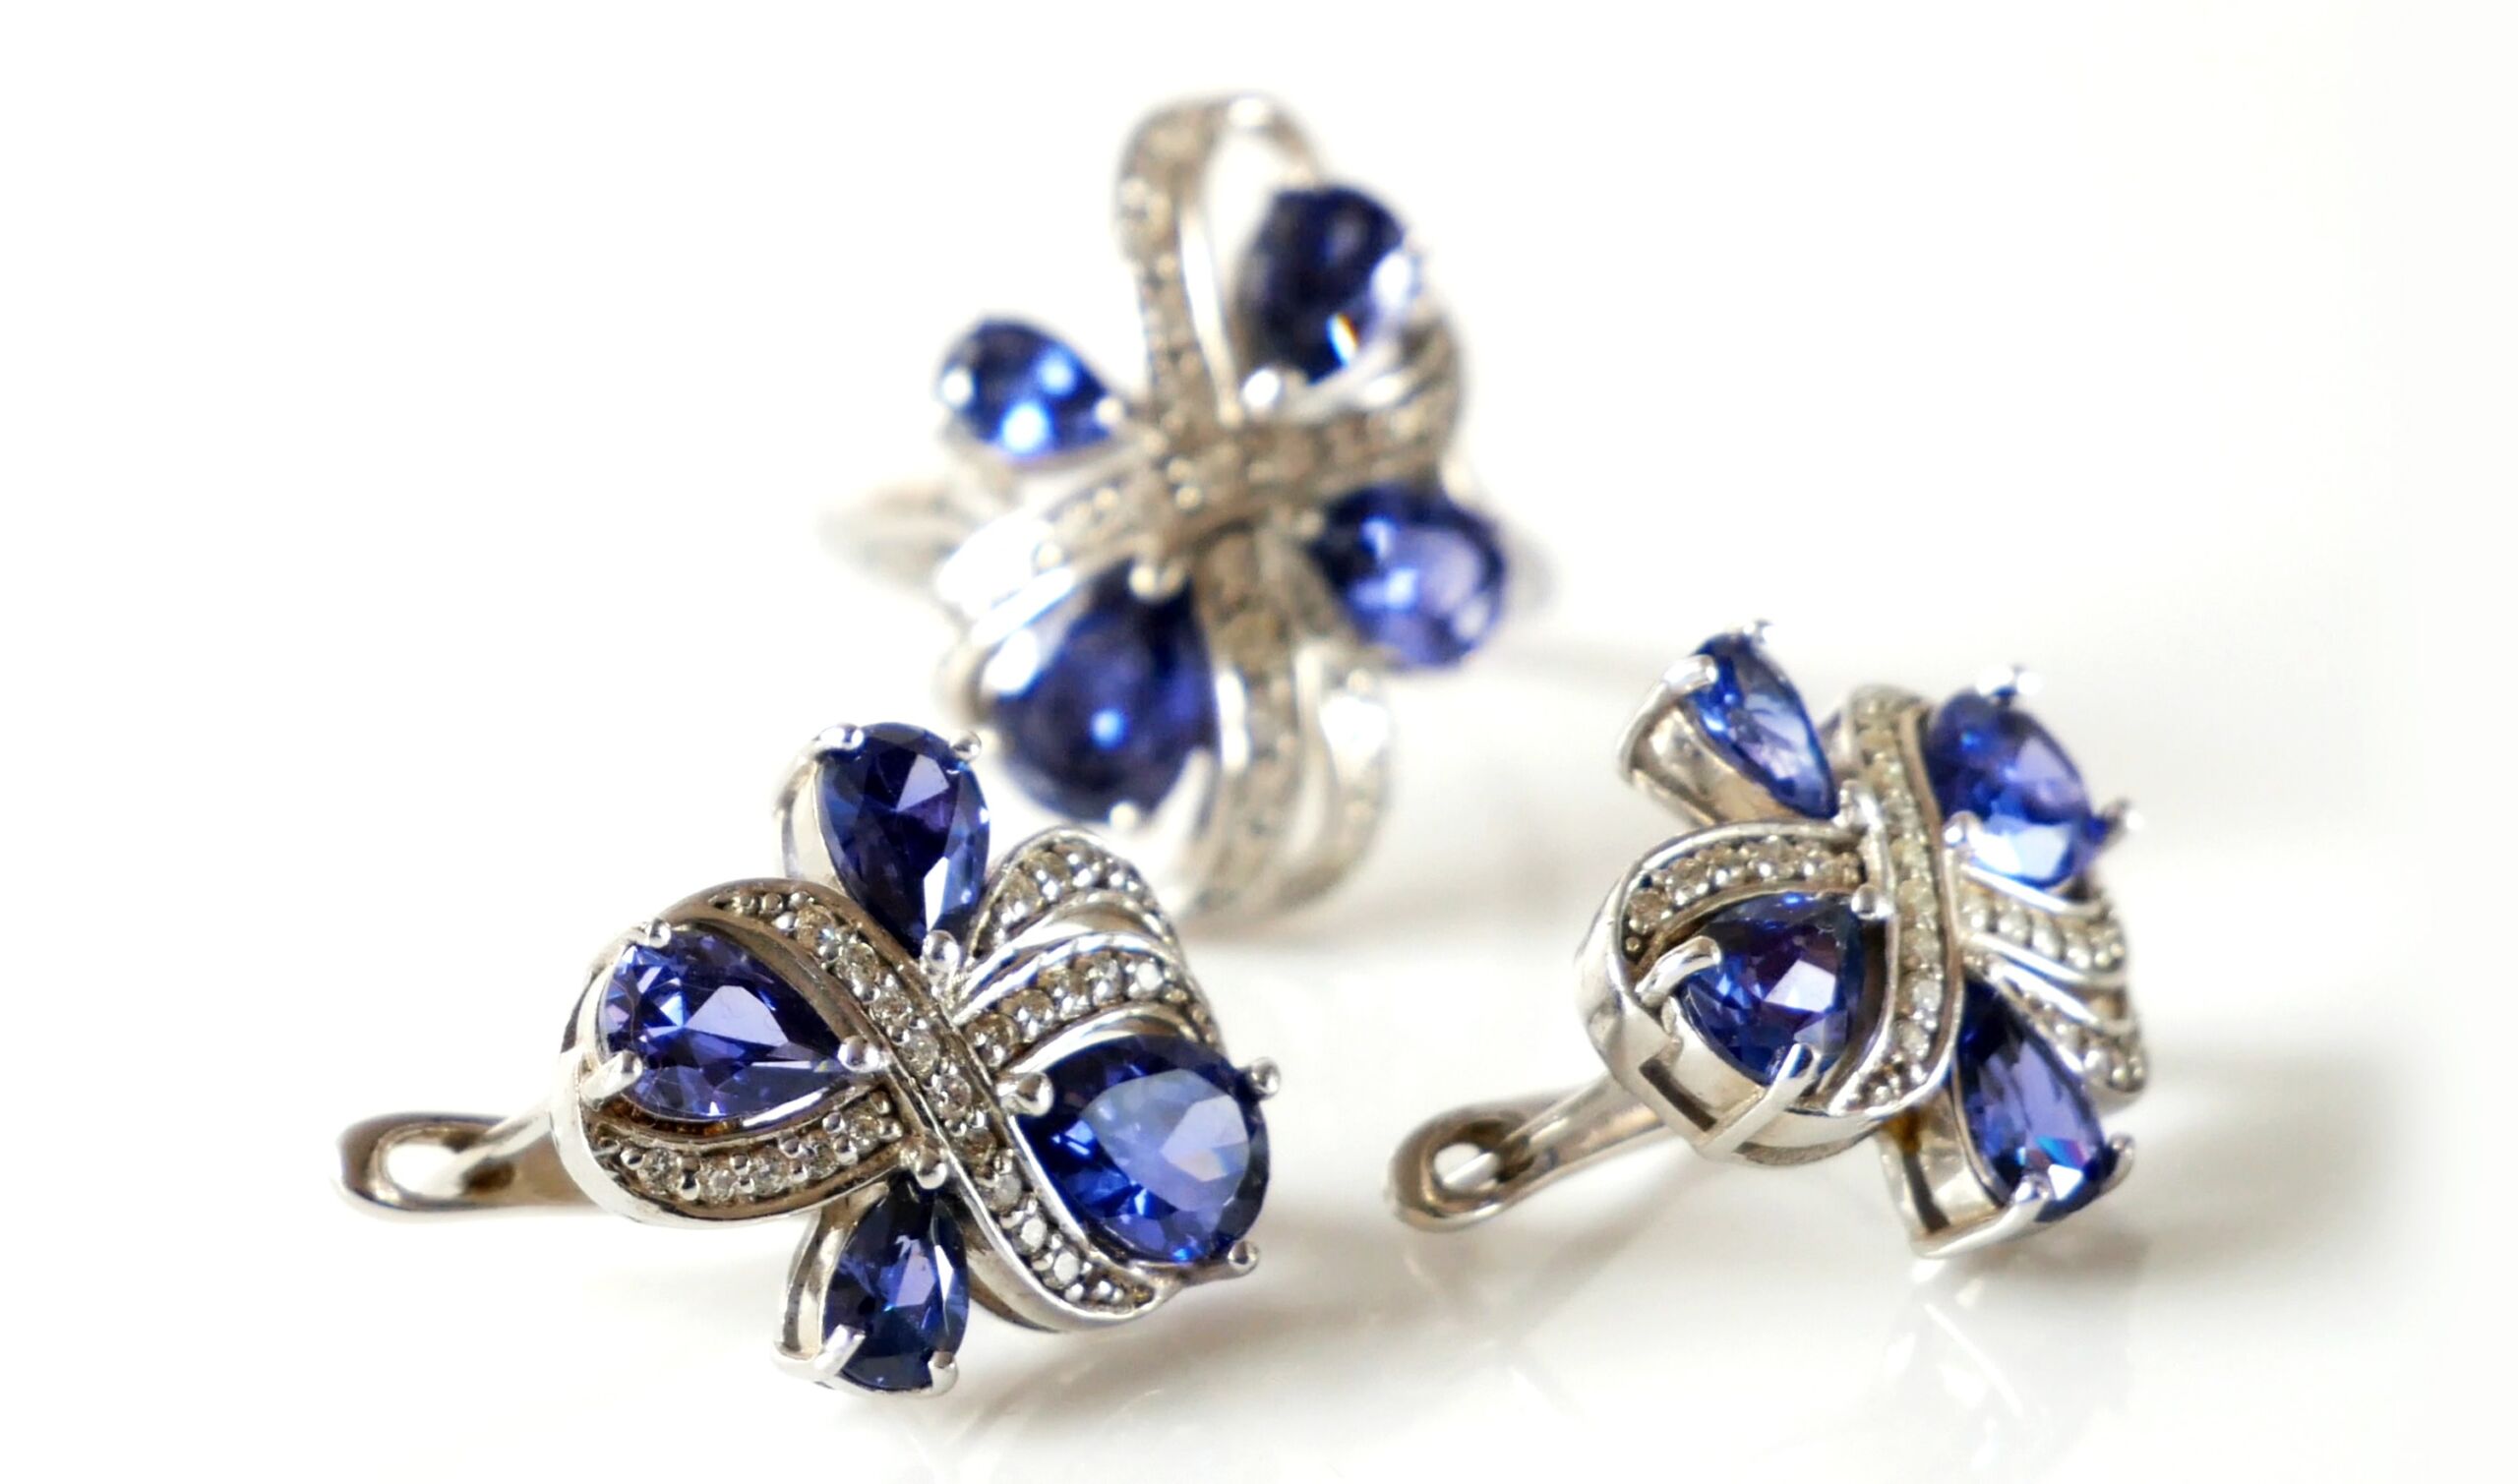 Image of tanzanite earring and ring set